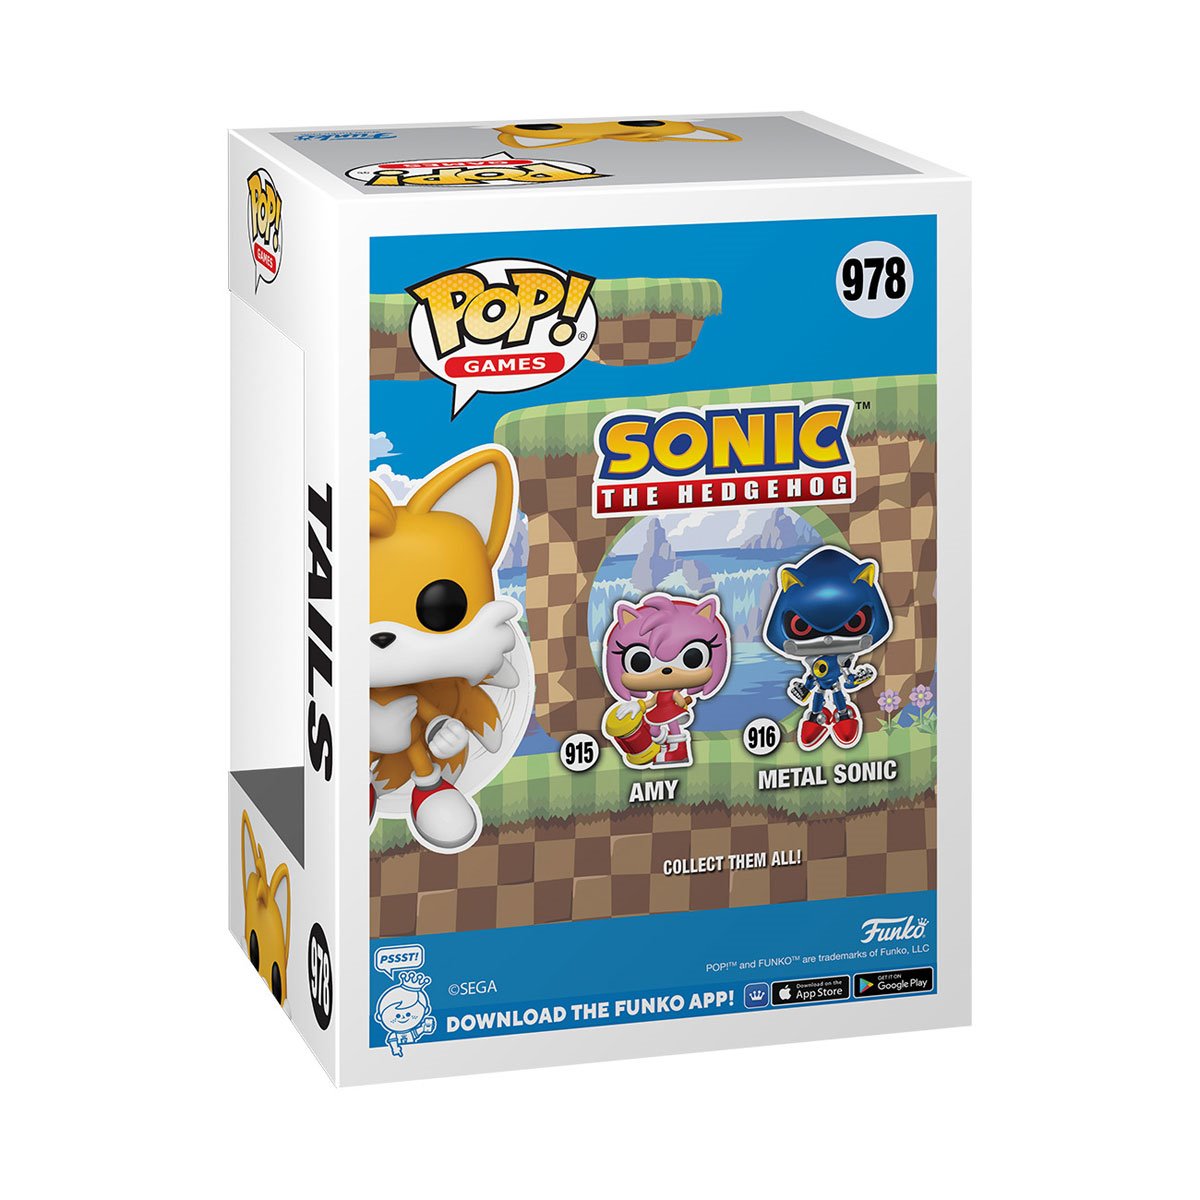 POP! Games: Sonic The Hedgehog - Tails #978 (Funko Specialty Series Exclusive) || PRE-ORDER